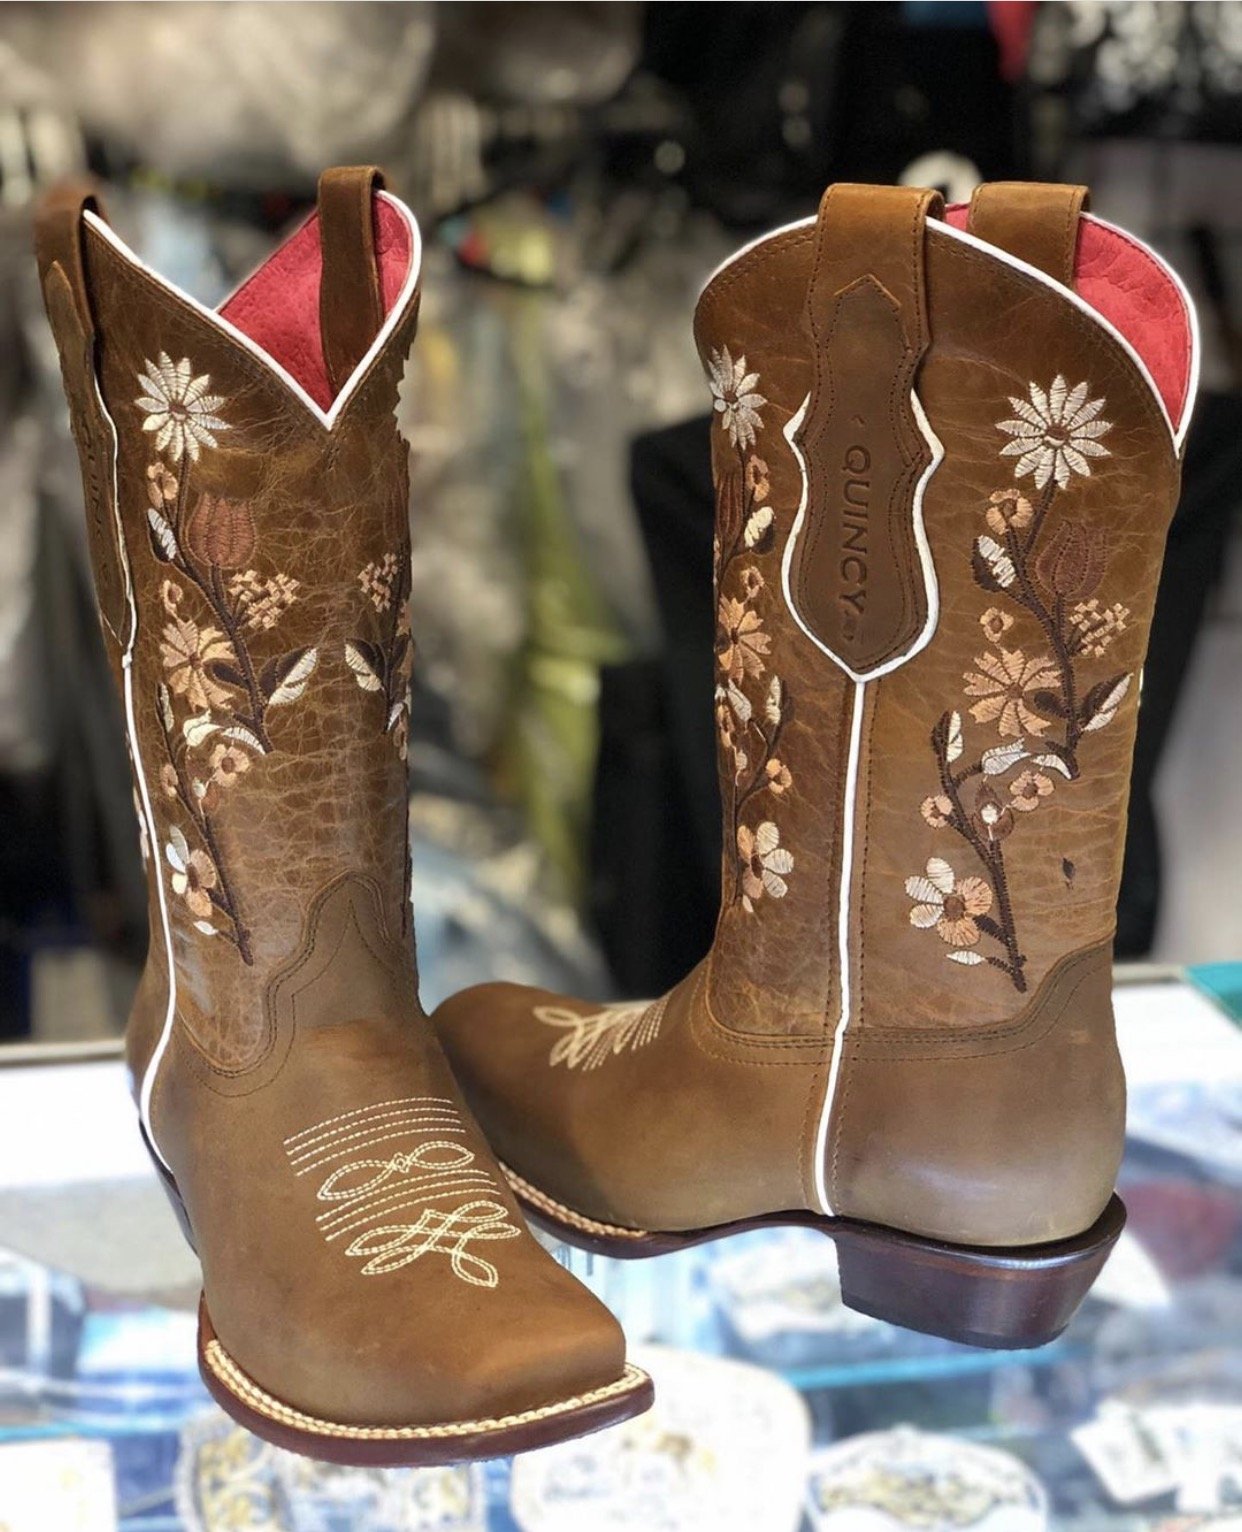 Volcano Leather Rodeo Boot in Honey w/ Flowers q3125251, vaquera